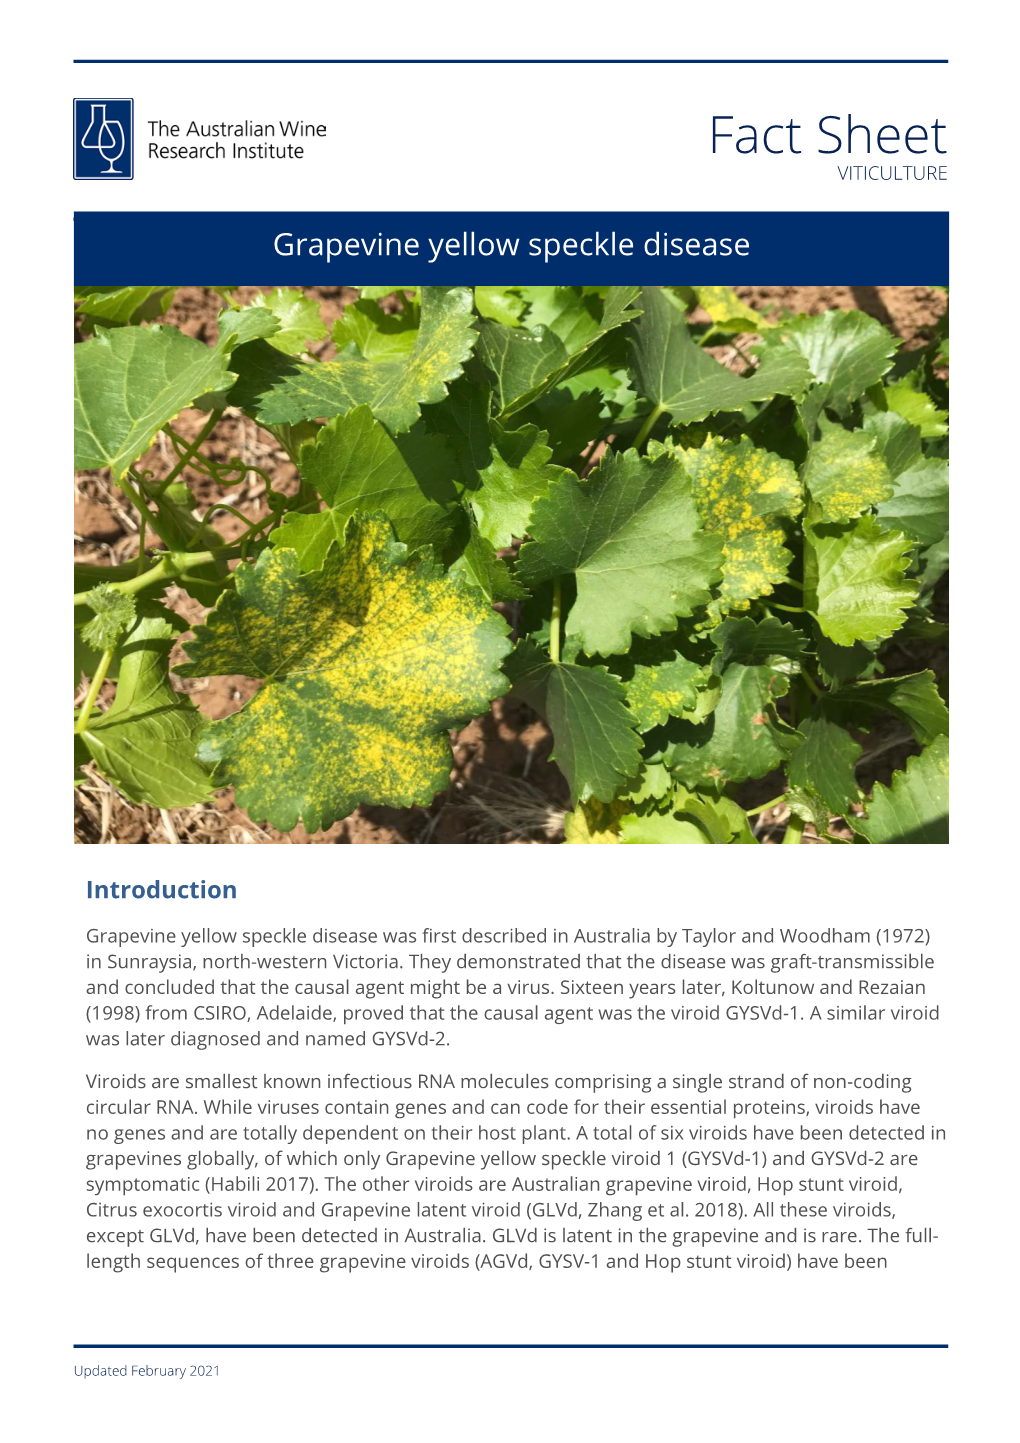 Grapevine Yellow Speckle Disease Fact Sheet